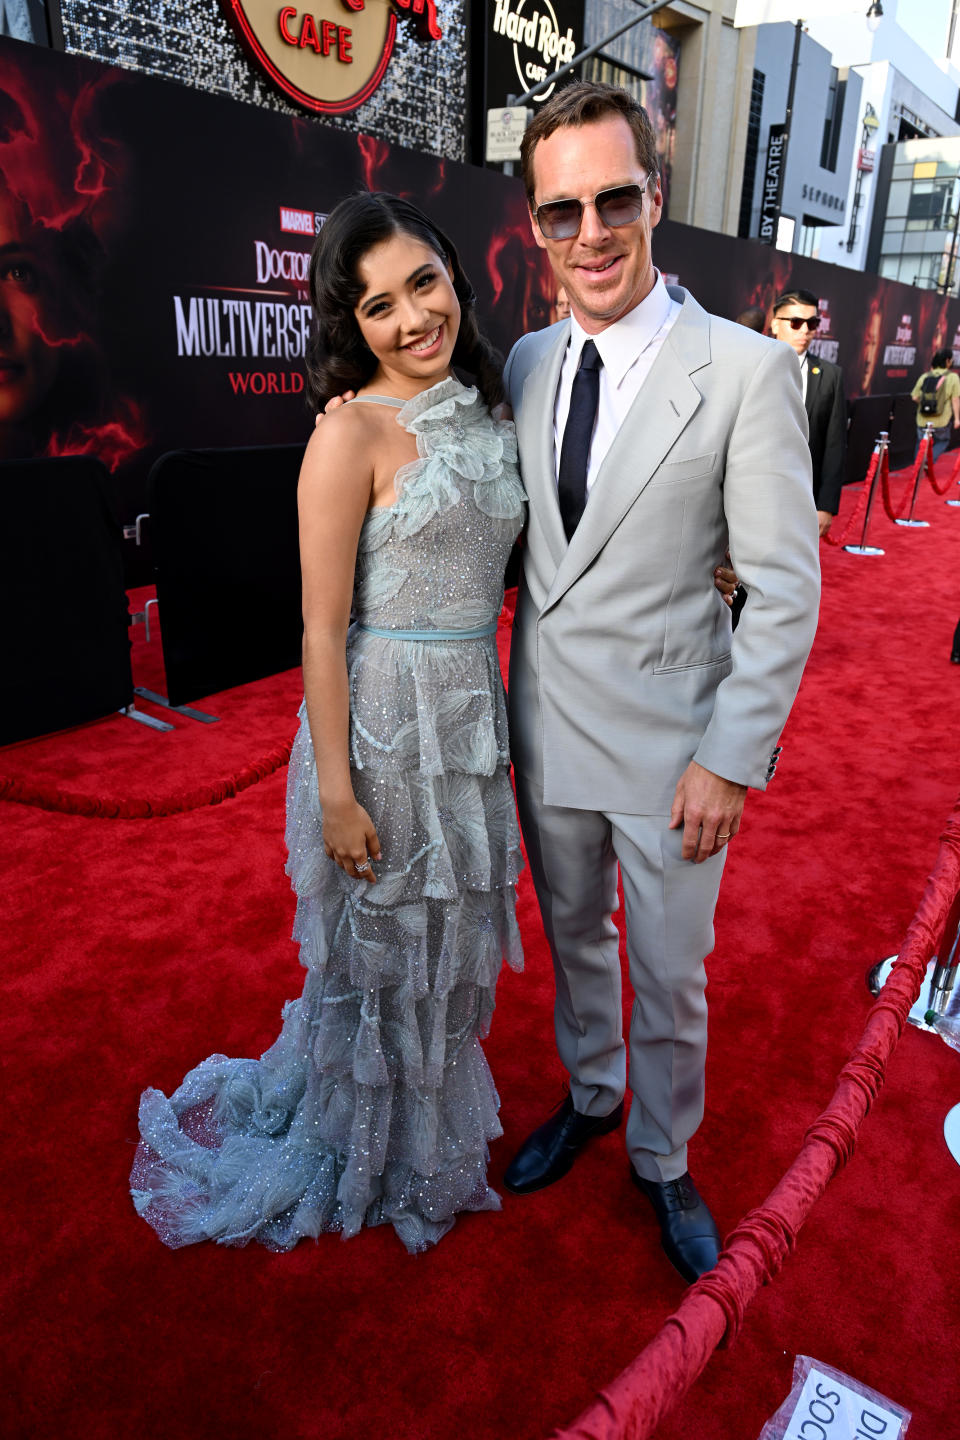 Xochitl Gomez and Benedict Cumberbatch at the “Doctor Strange in the Multiverse of Madness” world premiere. - Credit: Getty Images for Disney